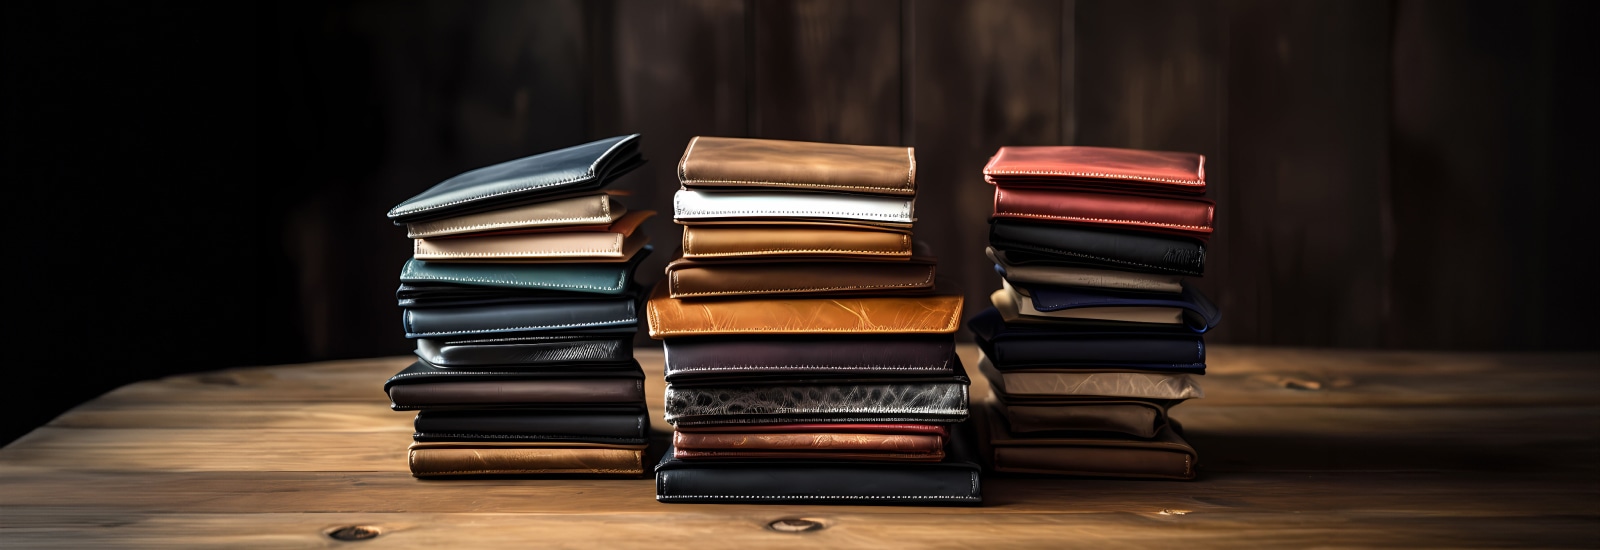 Several stacks of leather wallets on a wooden table